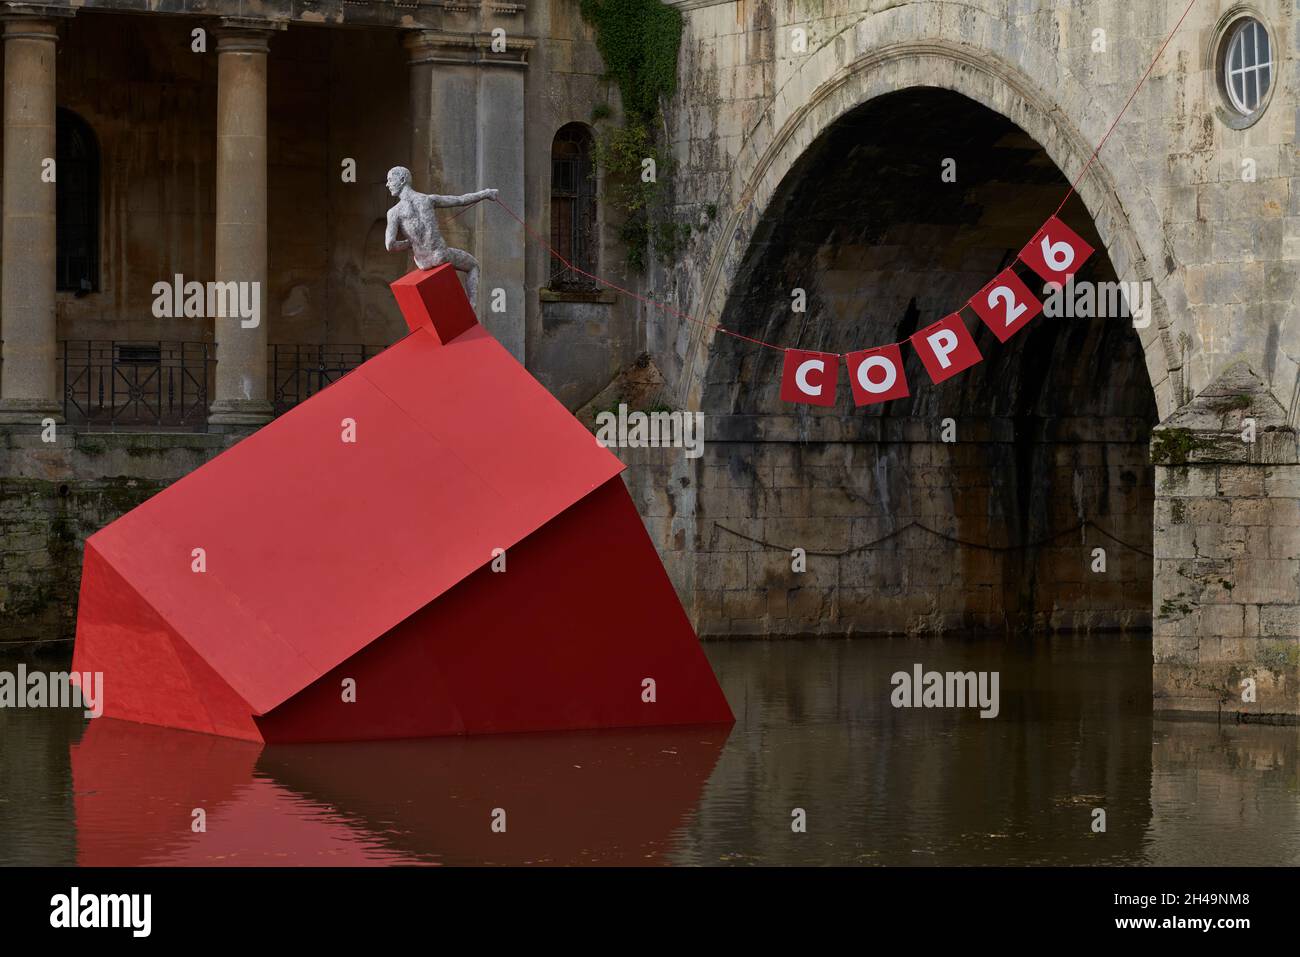 Artwork marking COP26 comprising a red sinking house in the River Avon in the historic city of Bath in the United Kingdom Stock Photo